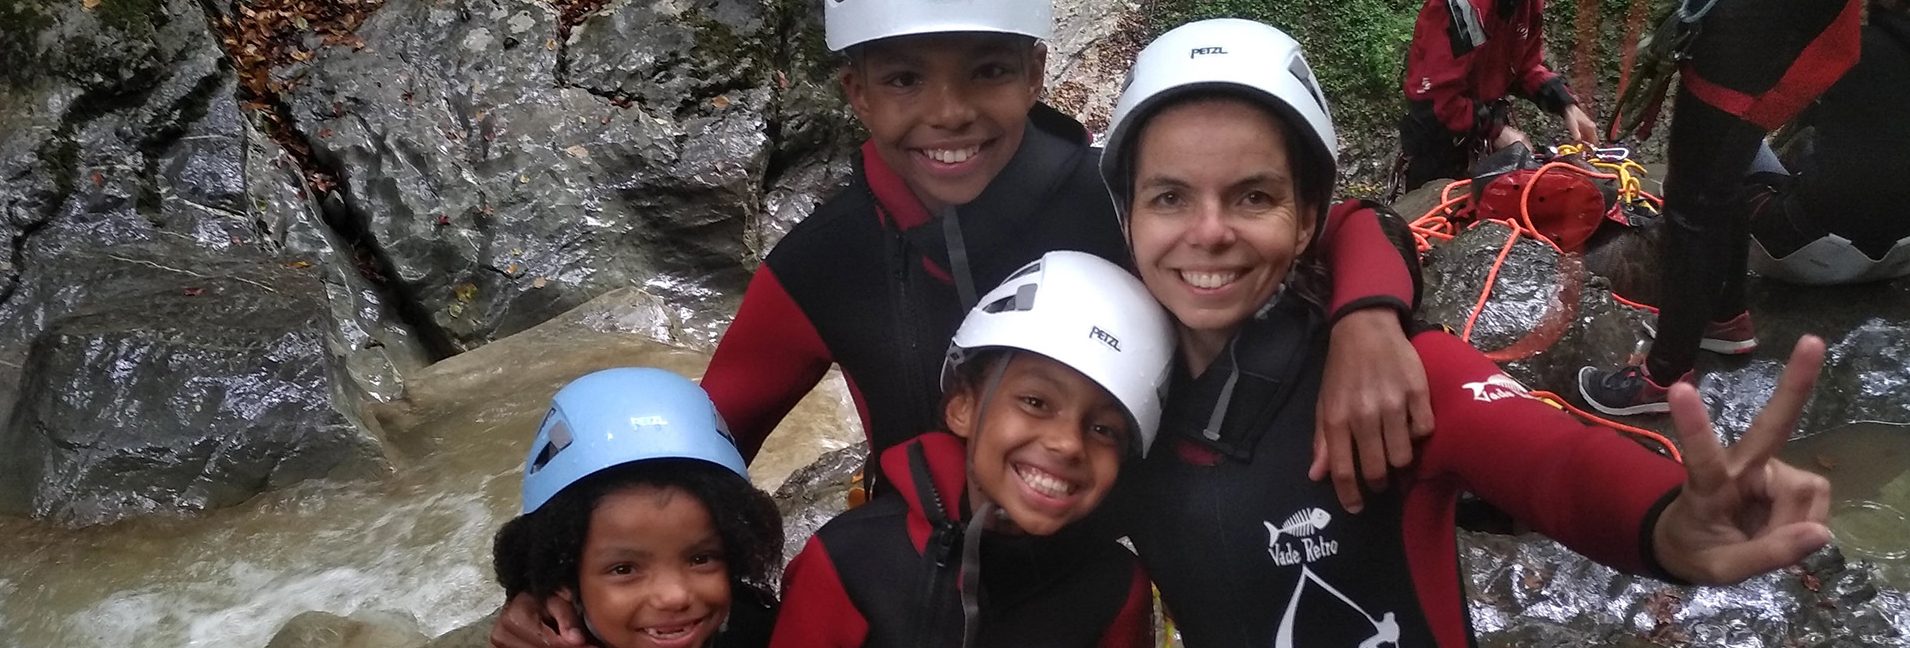 Formule famille - canyoning Angon